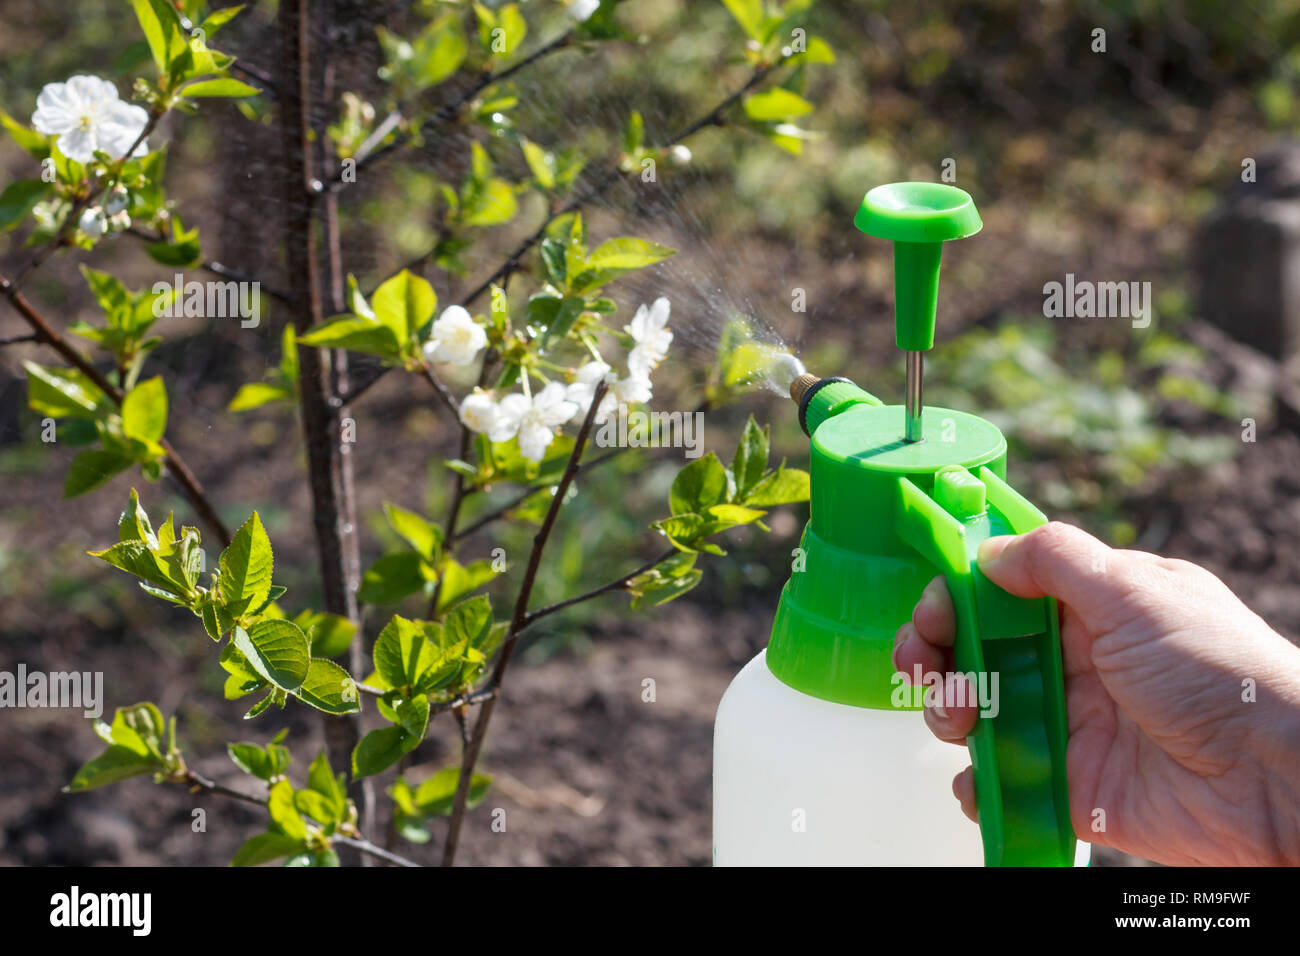 Watering Fruit Trees : Gardener Watering A Young Seedling Of Fruit Tree After Planting Spring Works In The Garden Stock Photo Picture And Royalty Free Image Image 76415409 - We did not find results for: